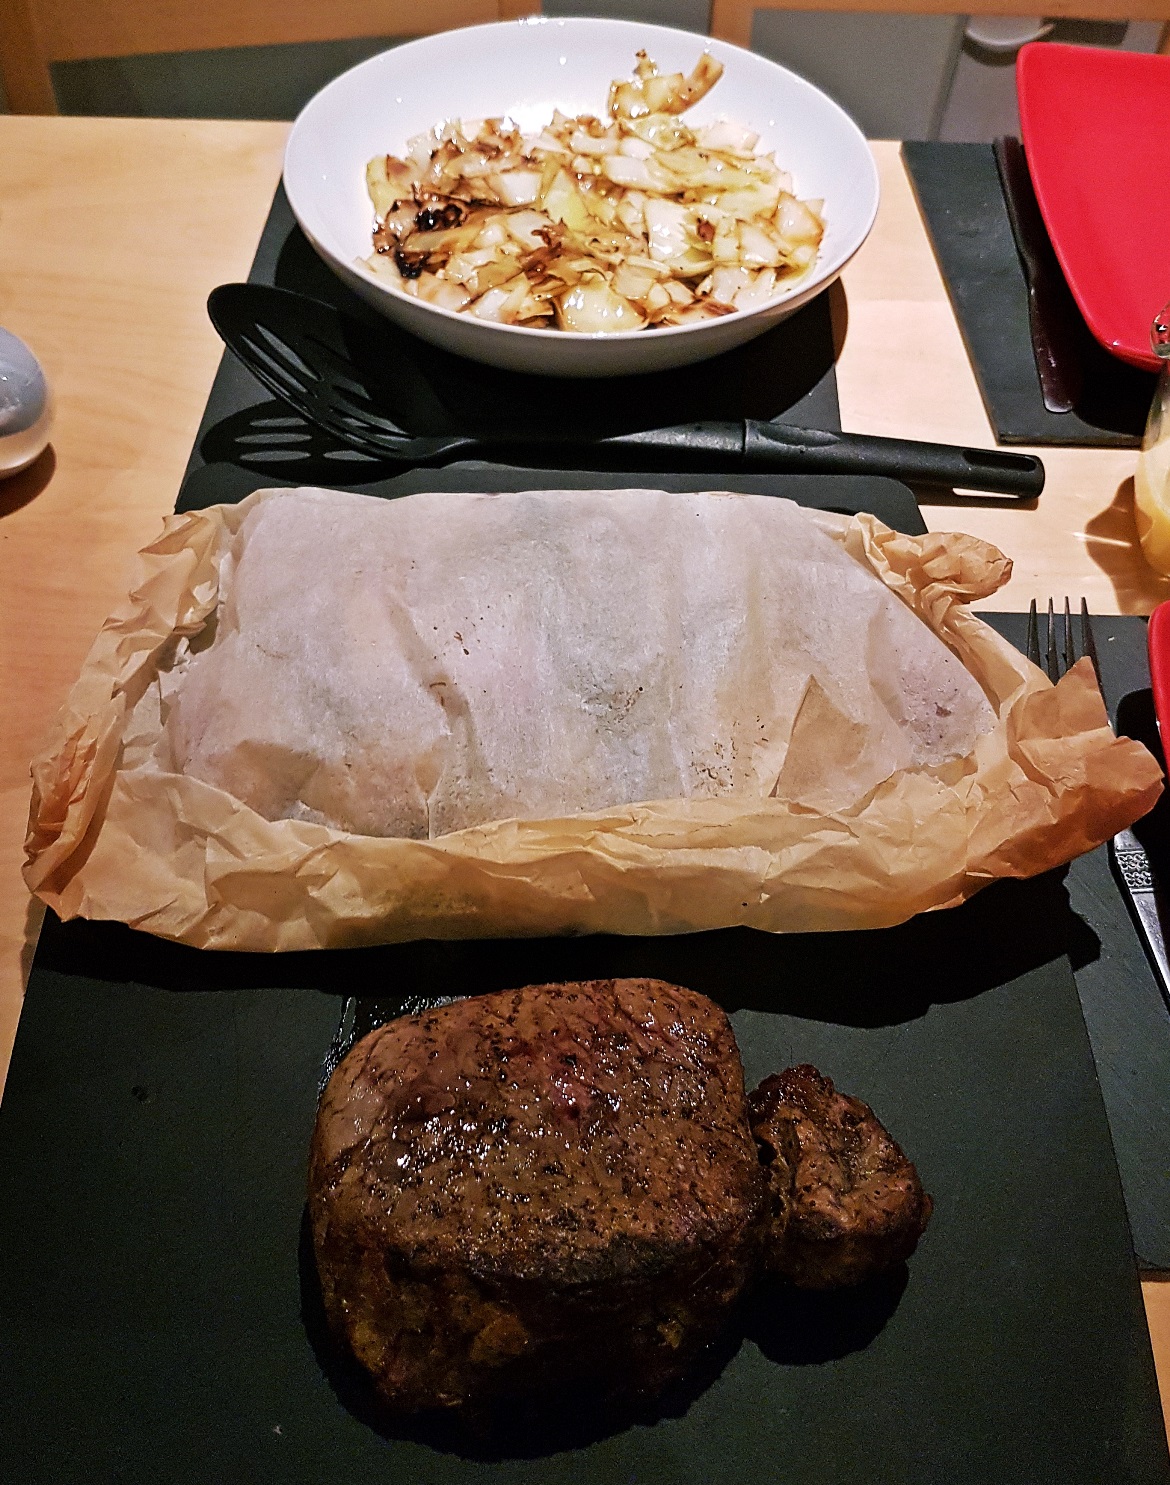 Buttered cabbage, parchment potatoes and chateaubriand - Conqueror's Chateaubriand and Ye Olde Parchment Potatoes - Cooking Games Recipe by BeckyBecky Blogs